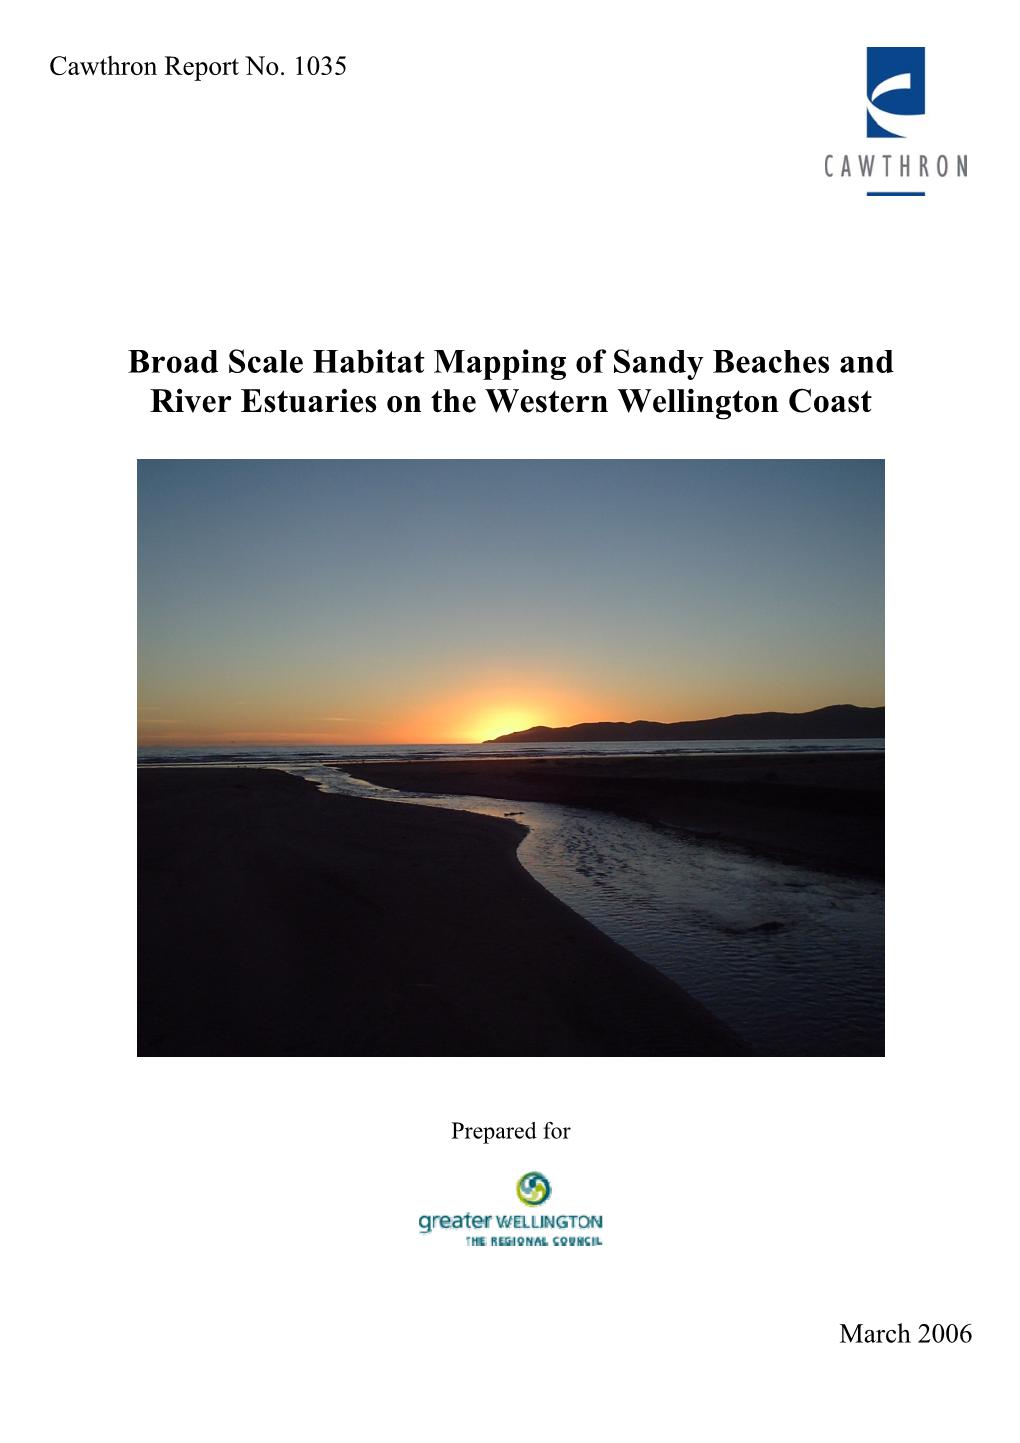 Broad Scale Habitat Mapping of Sandy Beaches and River Estuaries on the Western Wellington Coast